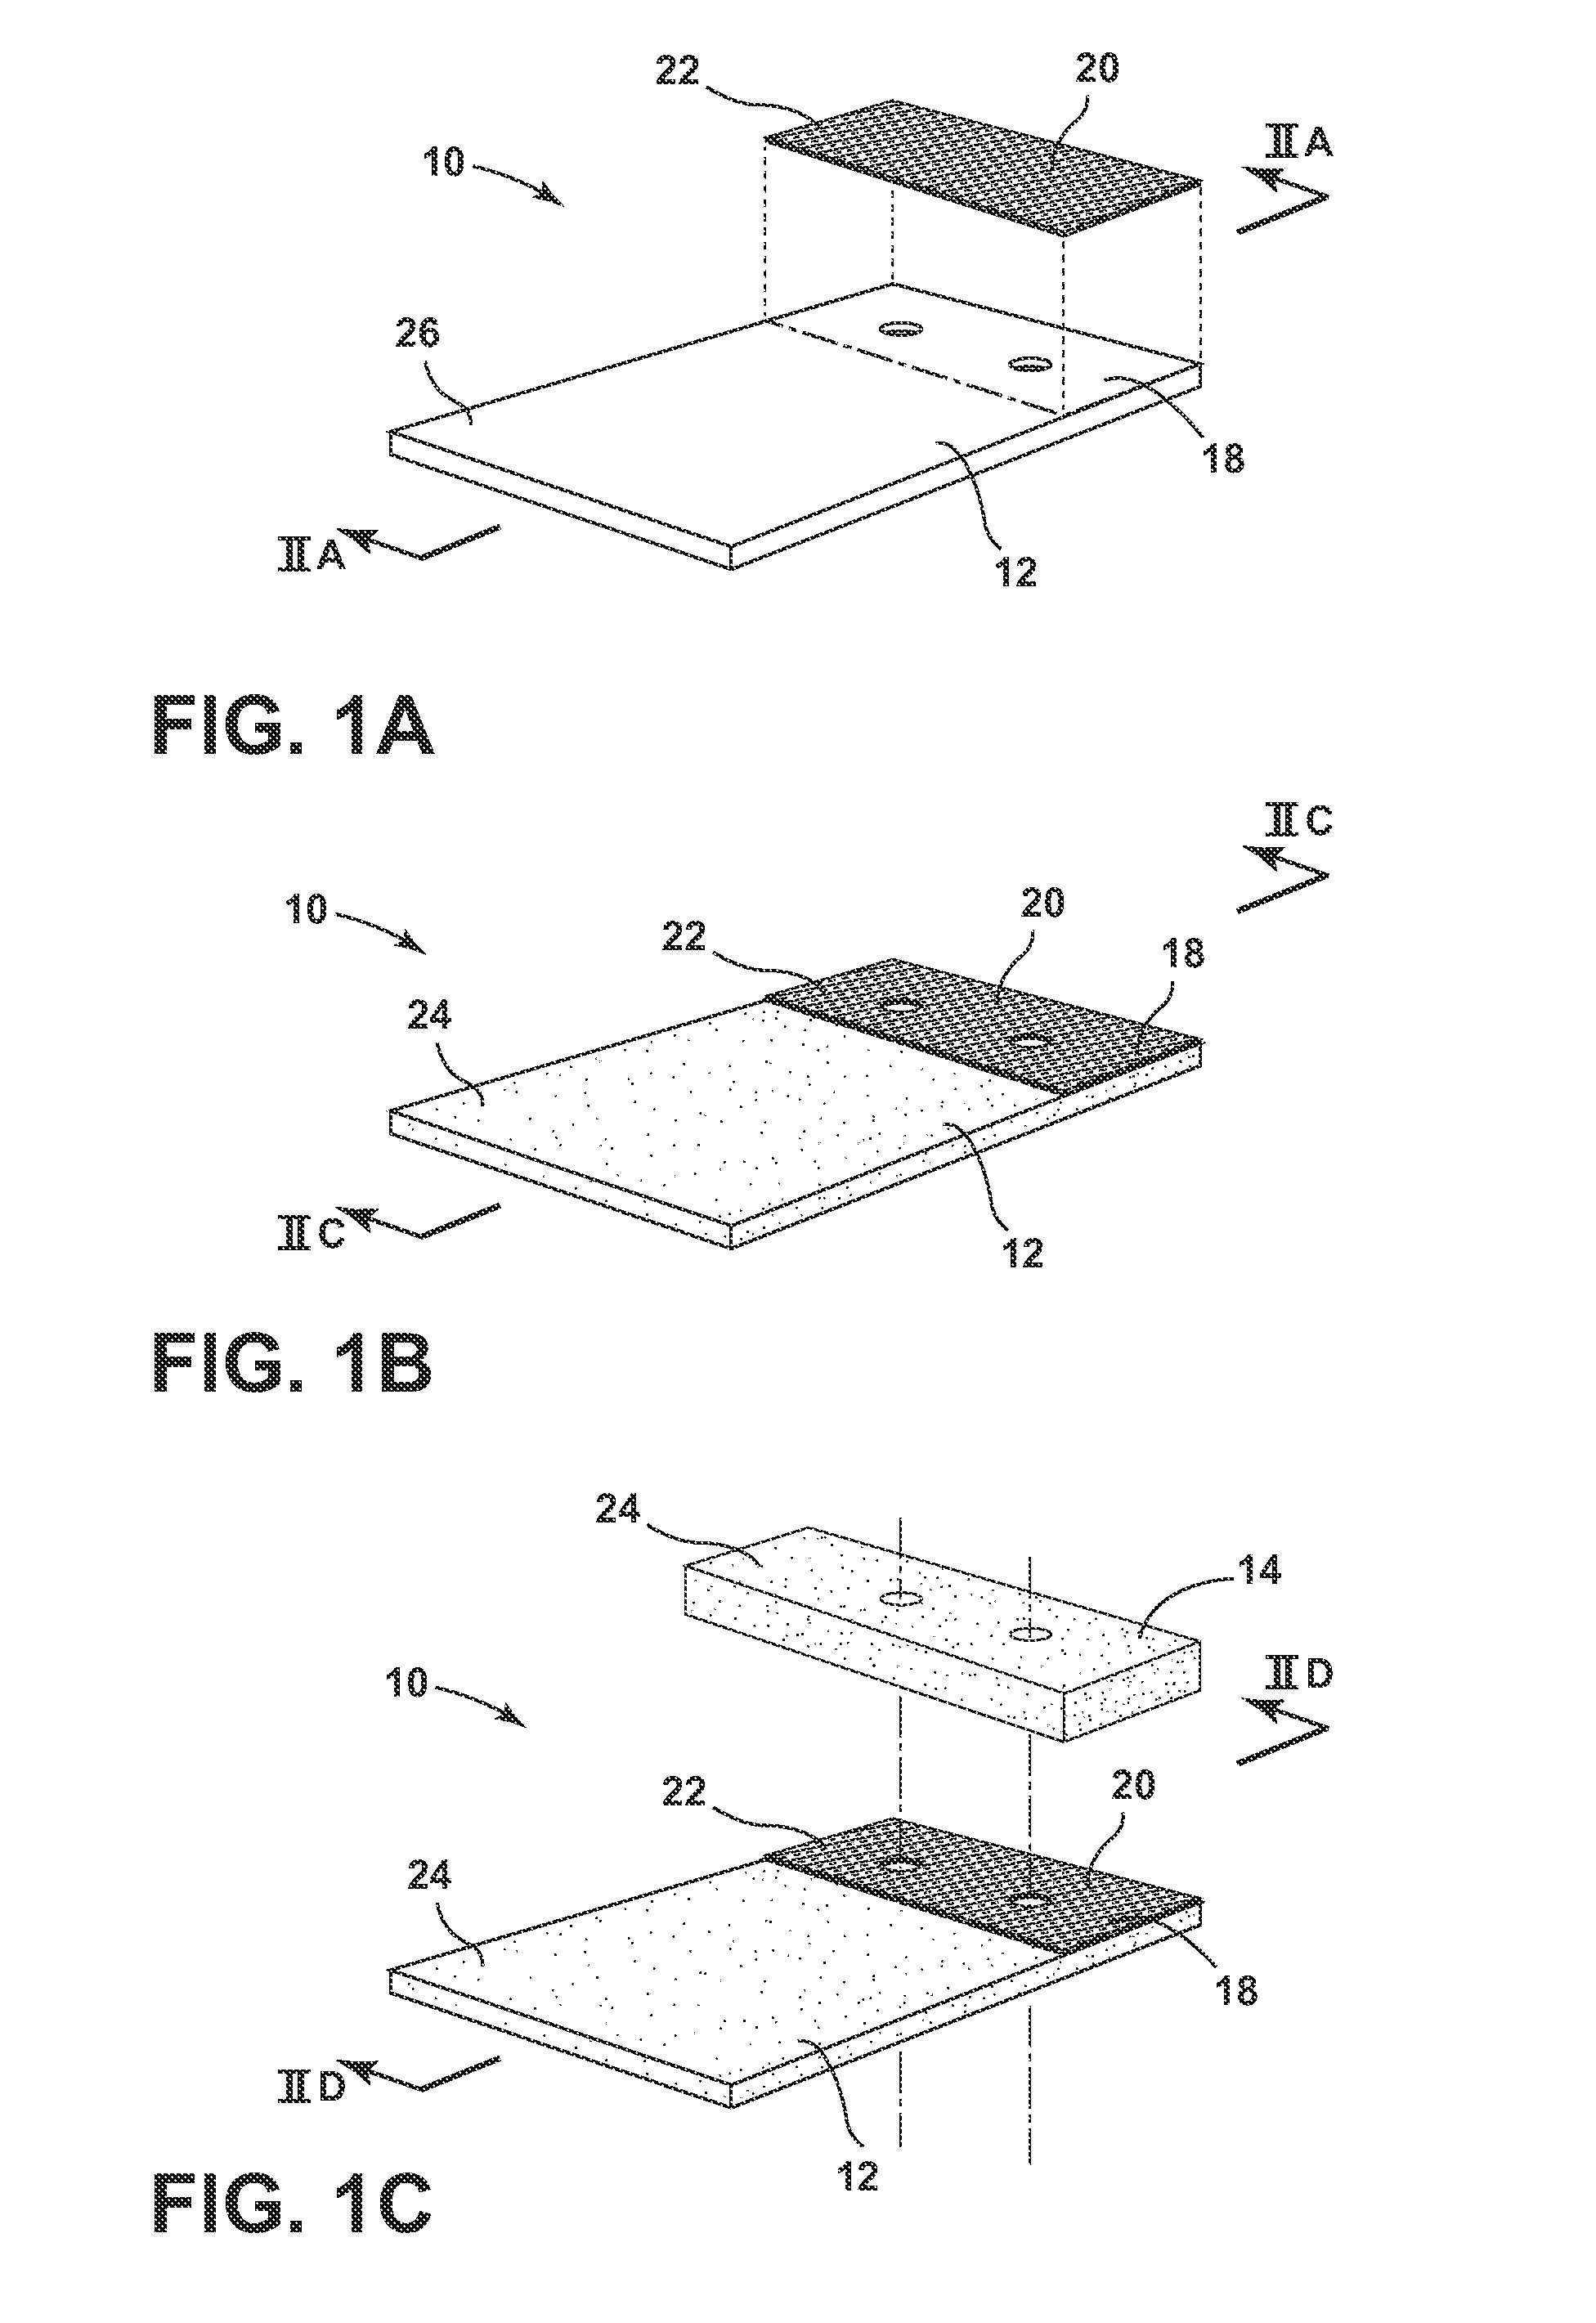 Method of providing a corrosion barrier between dissimilar metals with an epoxy insulator